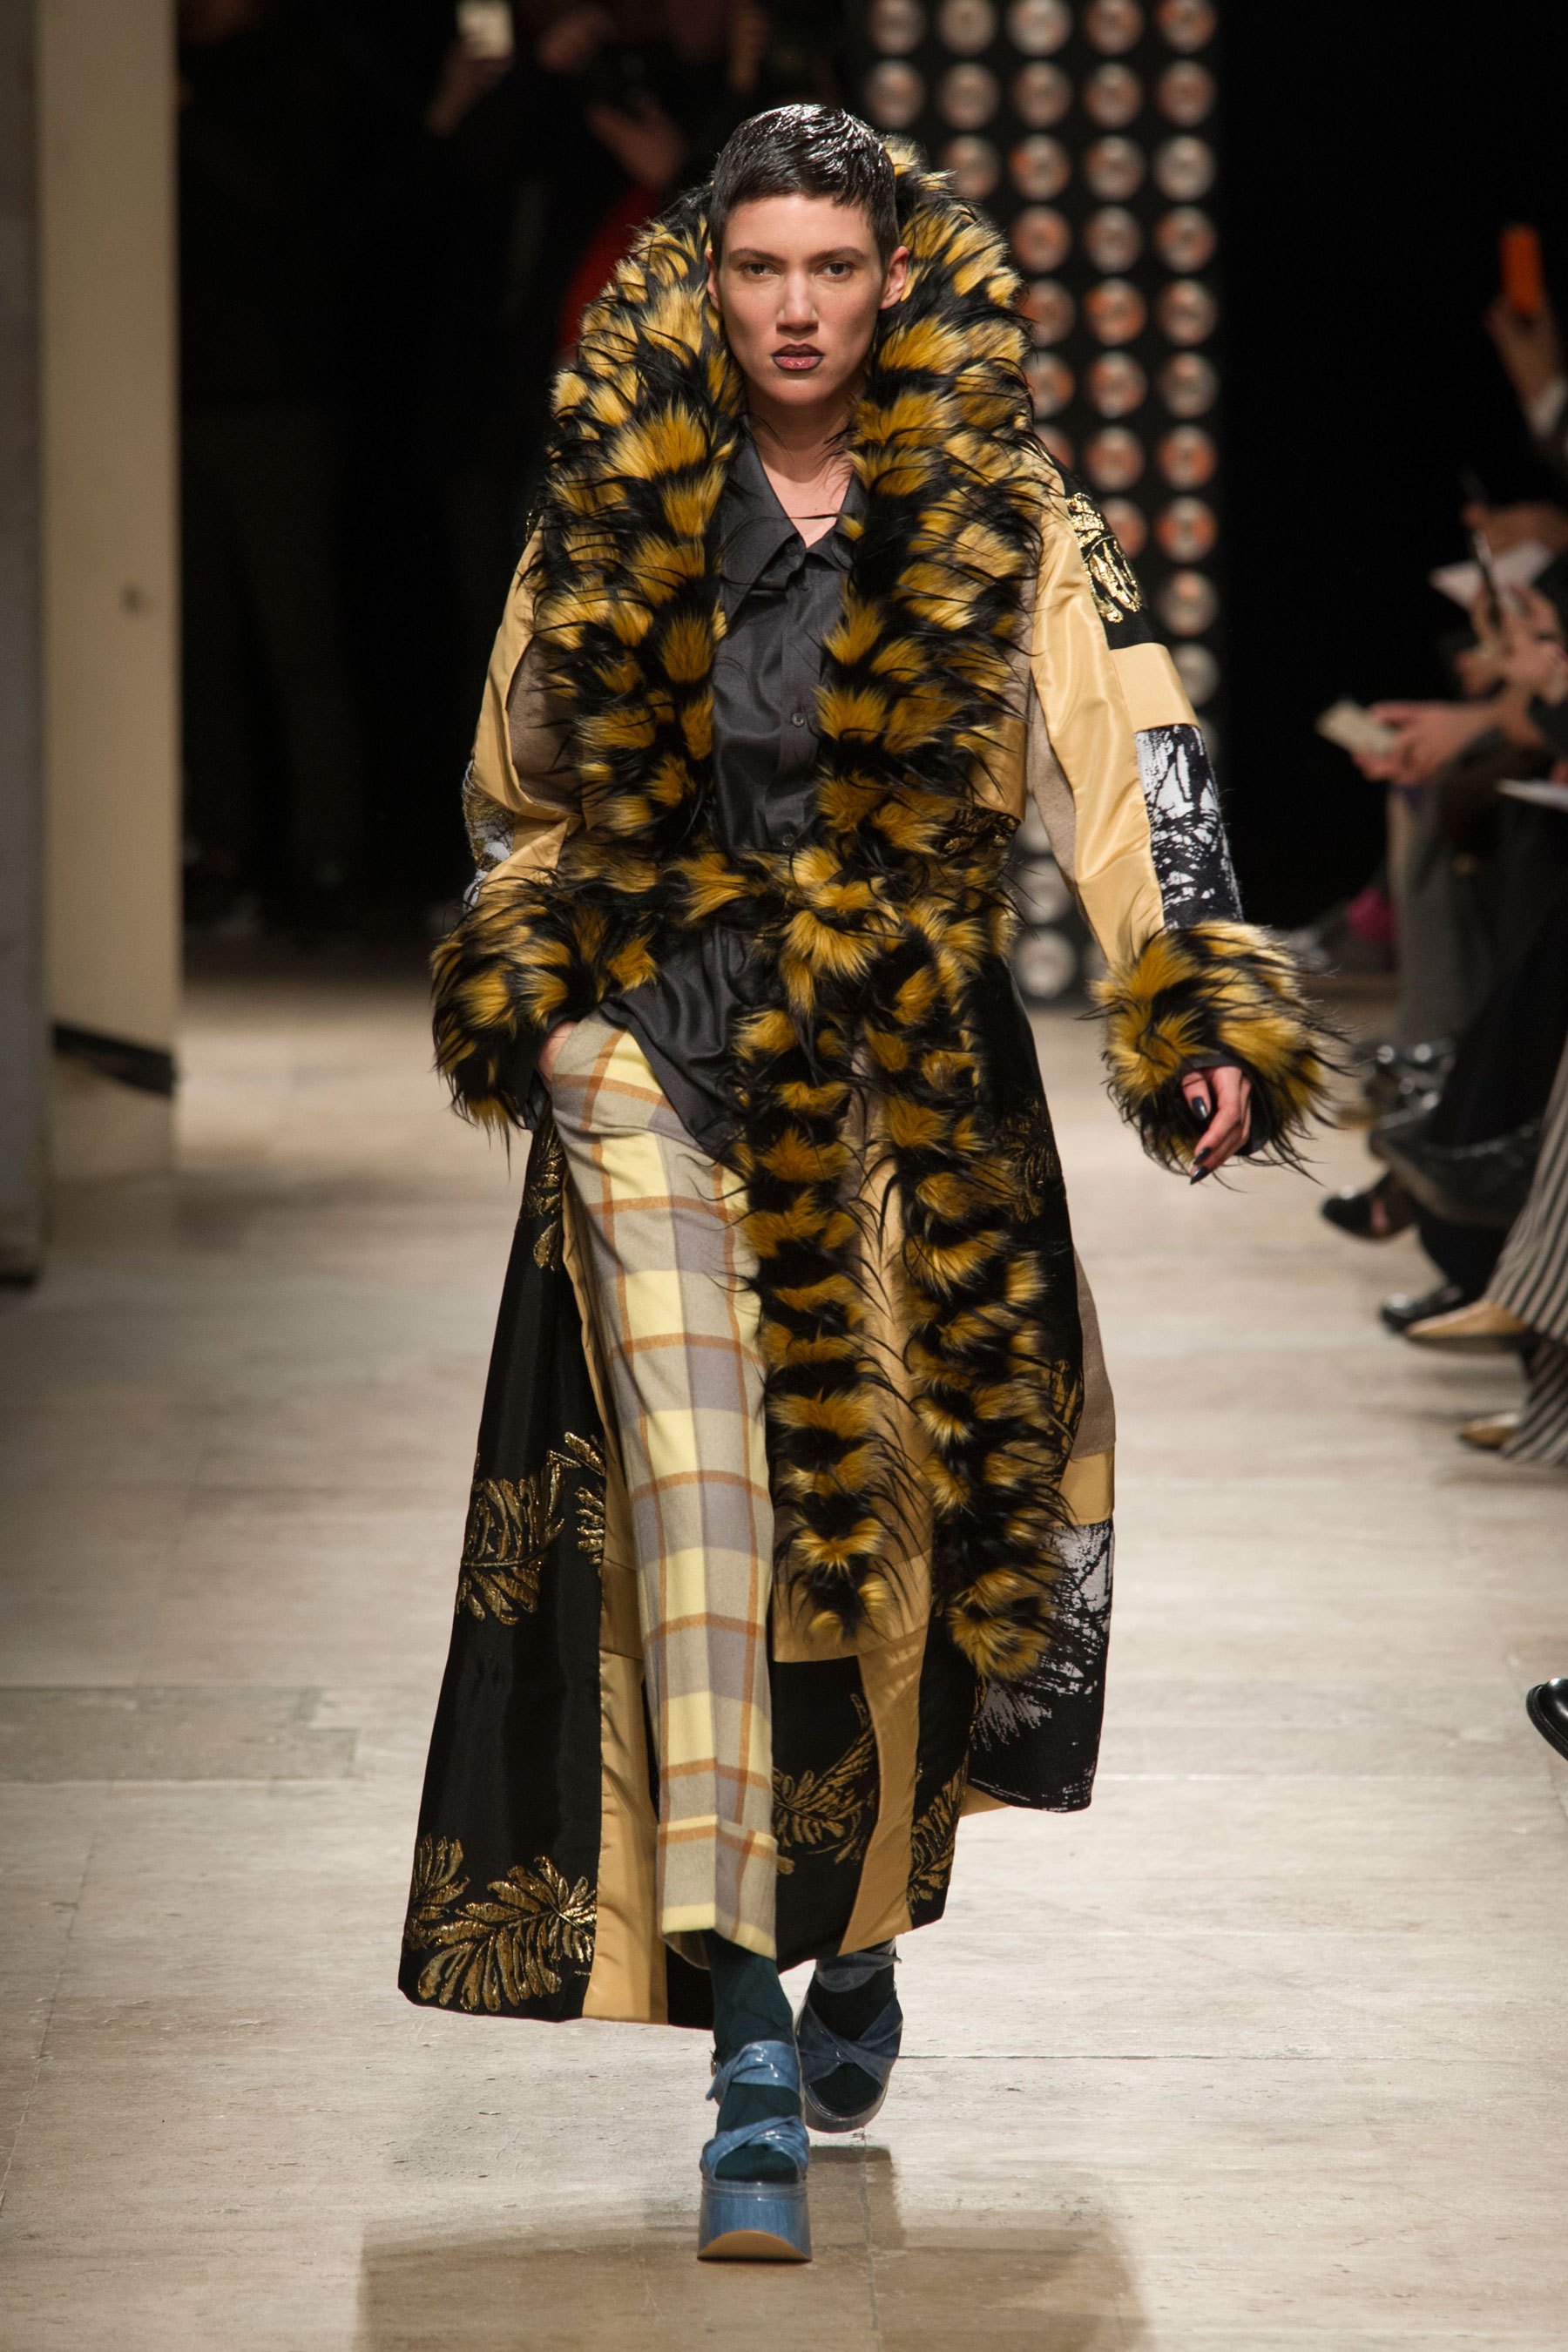 Burberry To Collaborate With Vivienne Westwood | The Impression